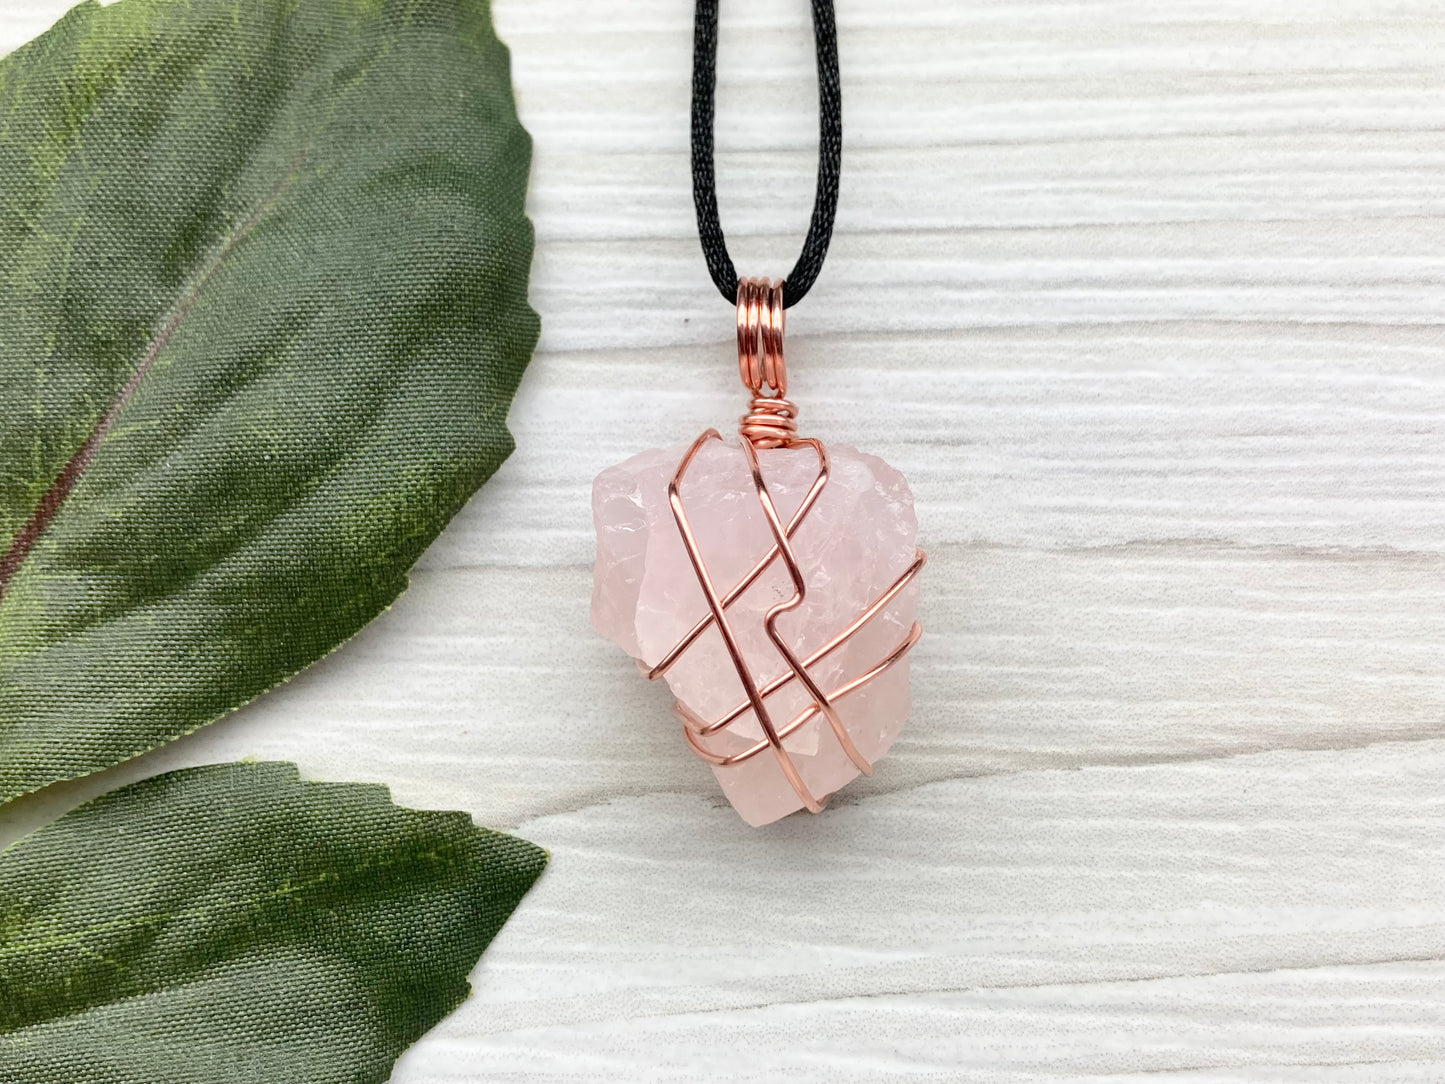 Raw Rose Quartz Necklace. Light Pink Crystal Wrapped With Copper Wire. Comes On A Black Chain. Capricorn Zodiac Stone Jewelry. New Age Boho Style.